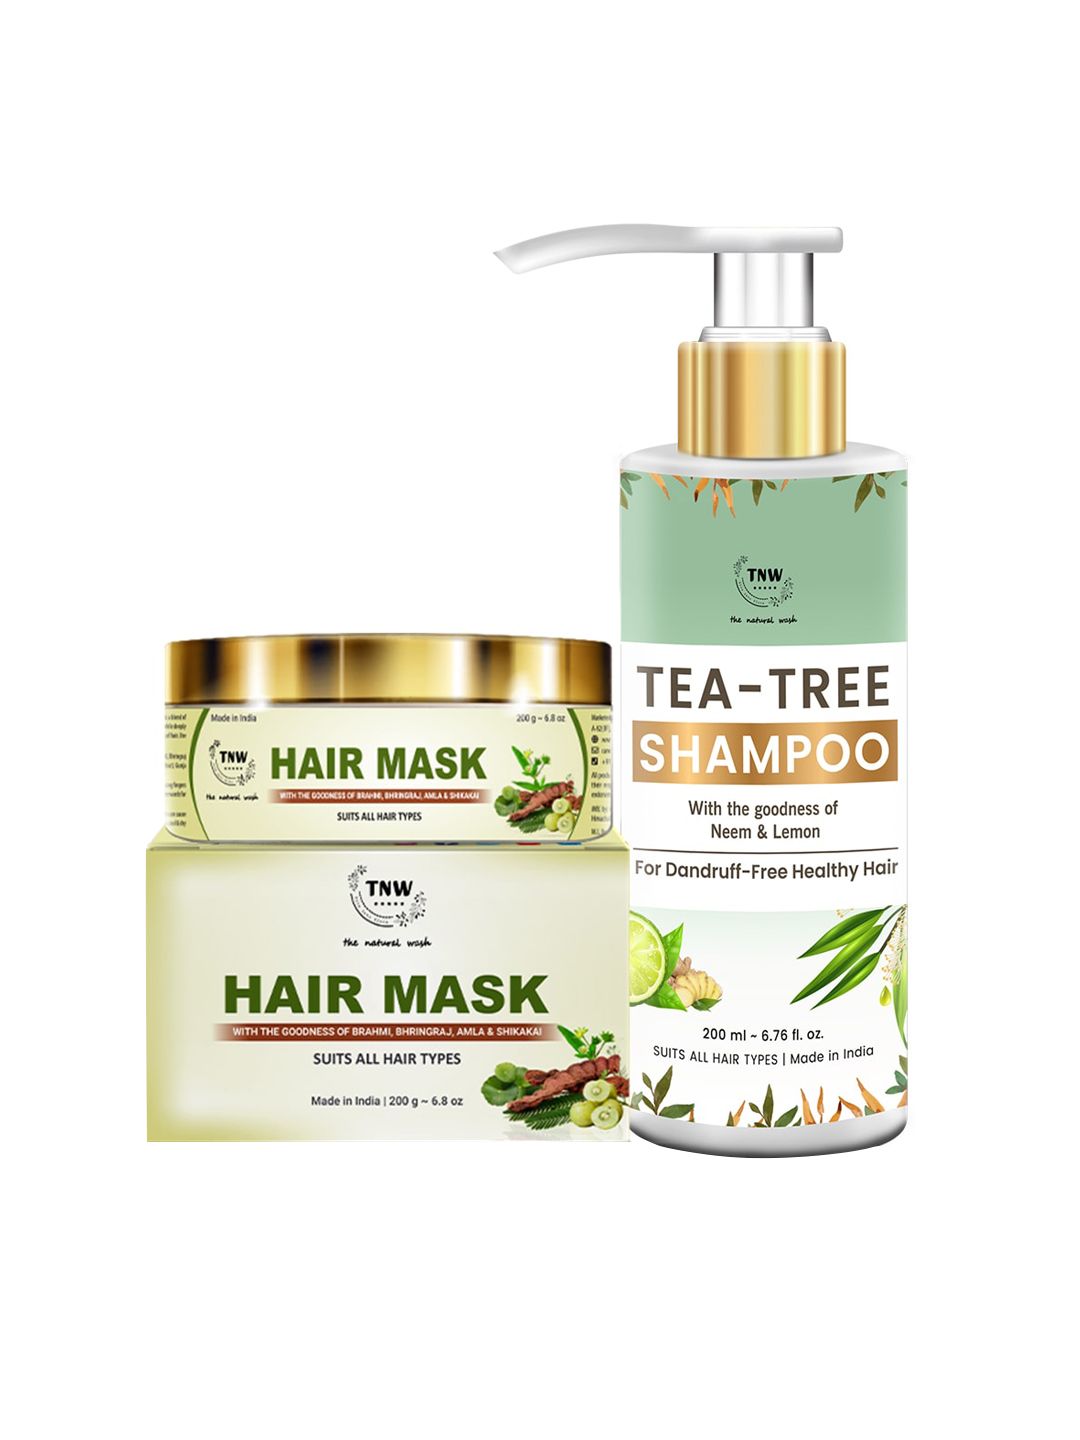 TNW the natural wash Pack of Tea Tree Shampoo and Amla Hair Mask for Dandruff-Free Hair Price in India